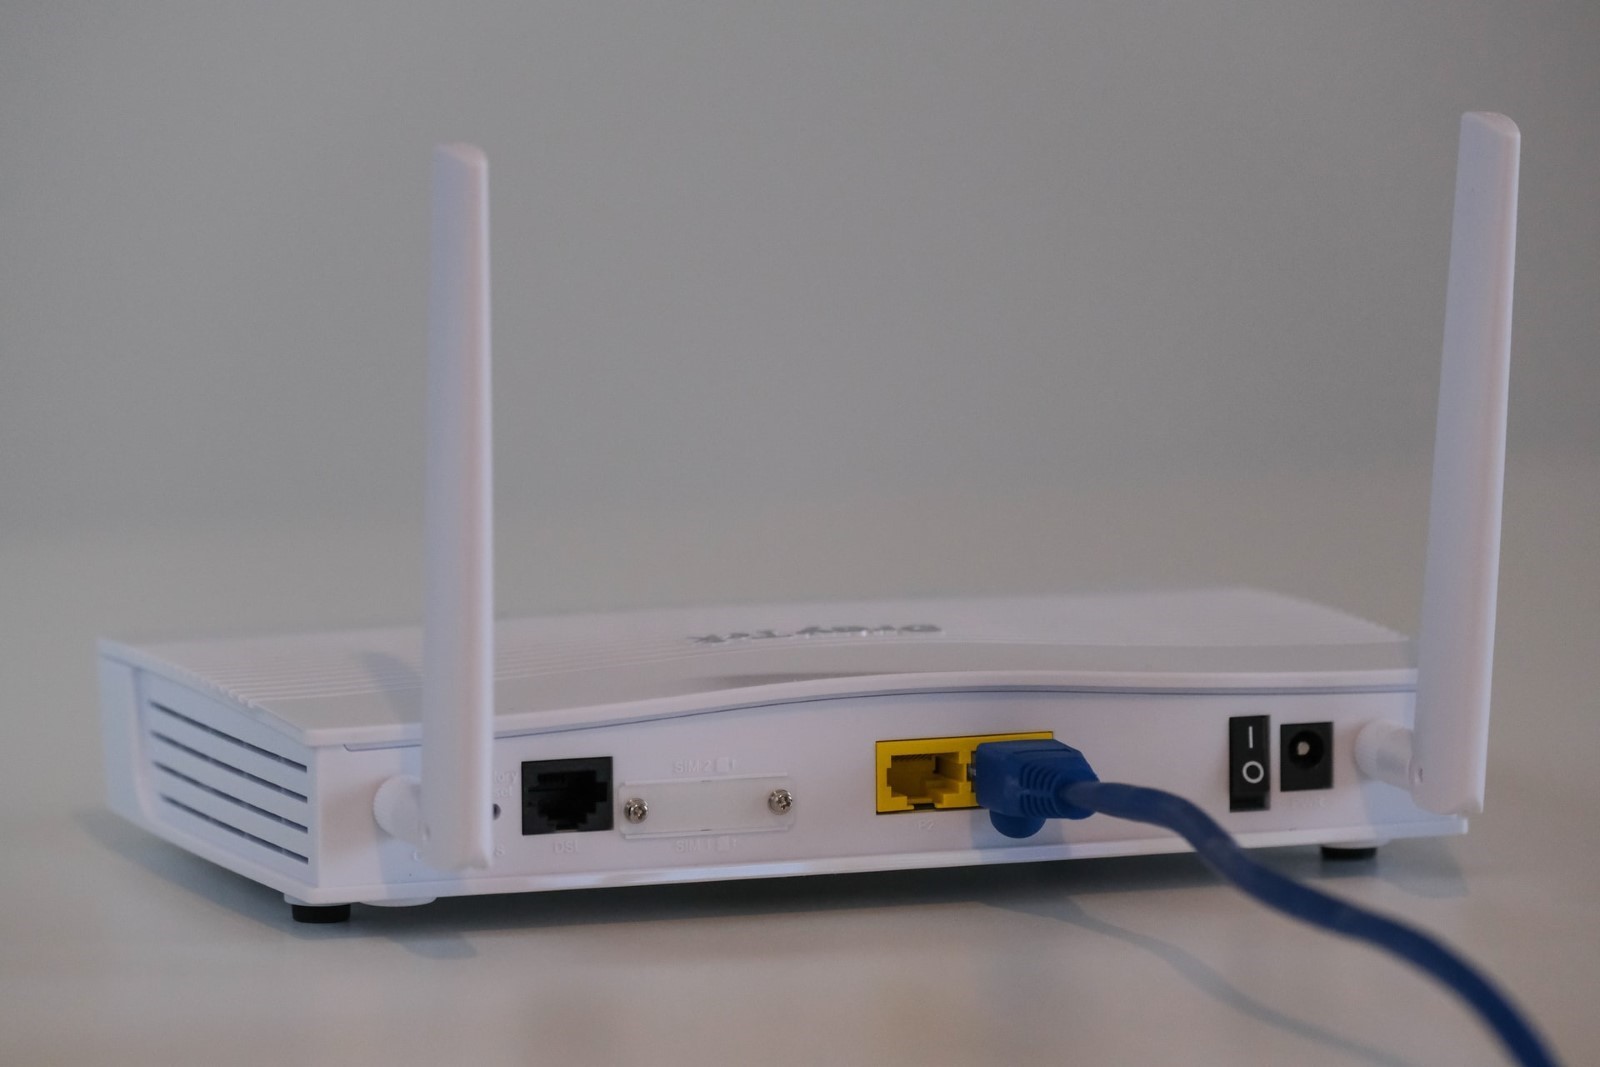 Finding a good router